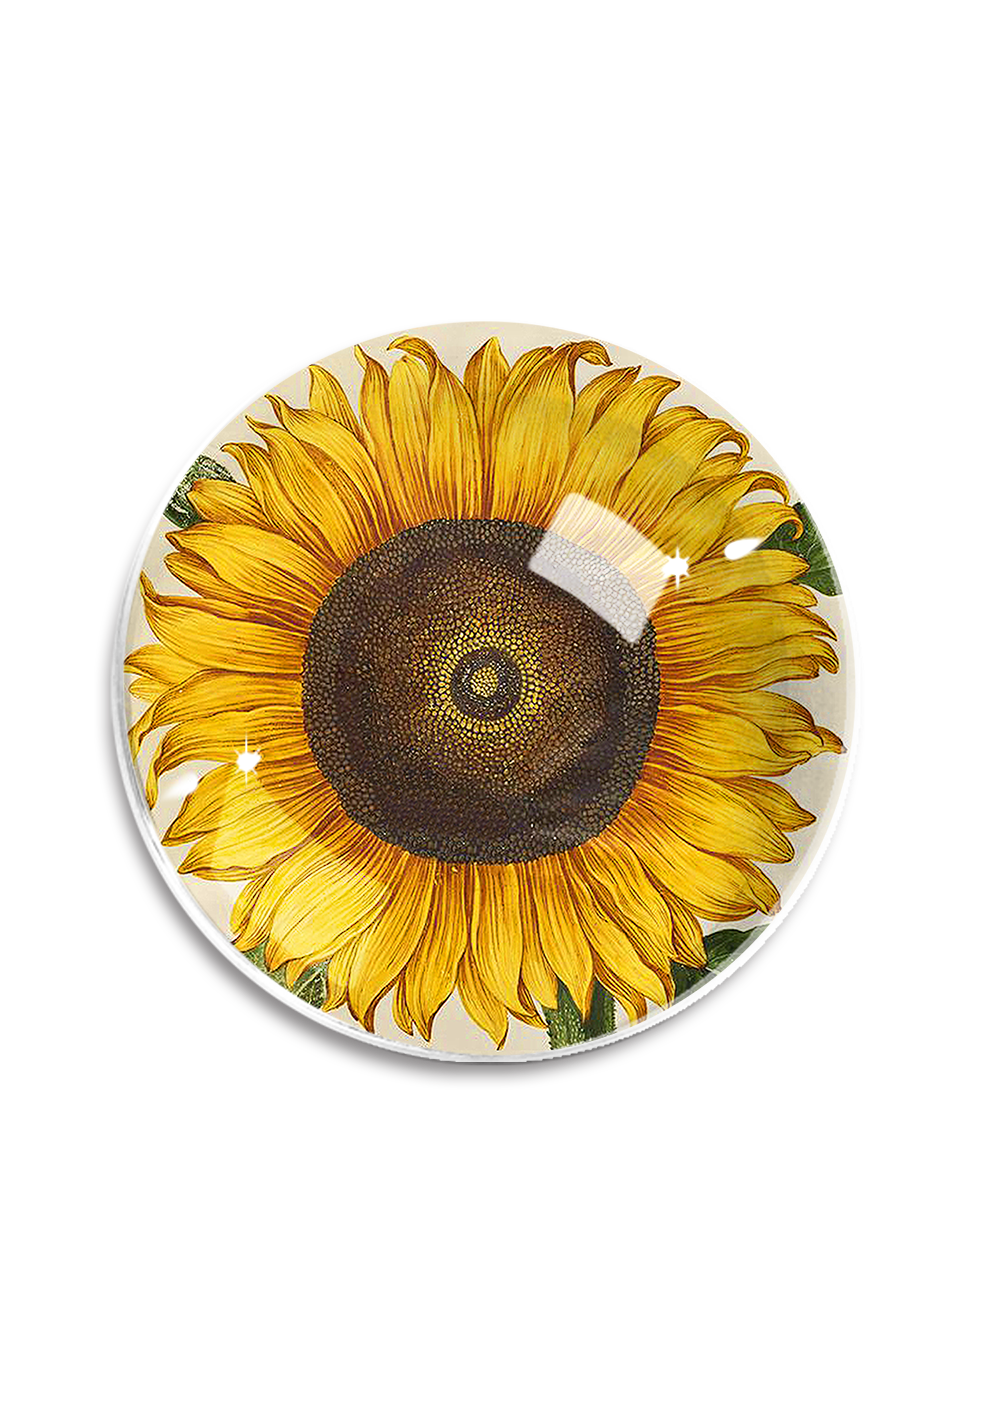 Bensgarden.com | Sunflower No.3 French Crystal Dome Paperweight - Ben's Garden. Made in New York City.